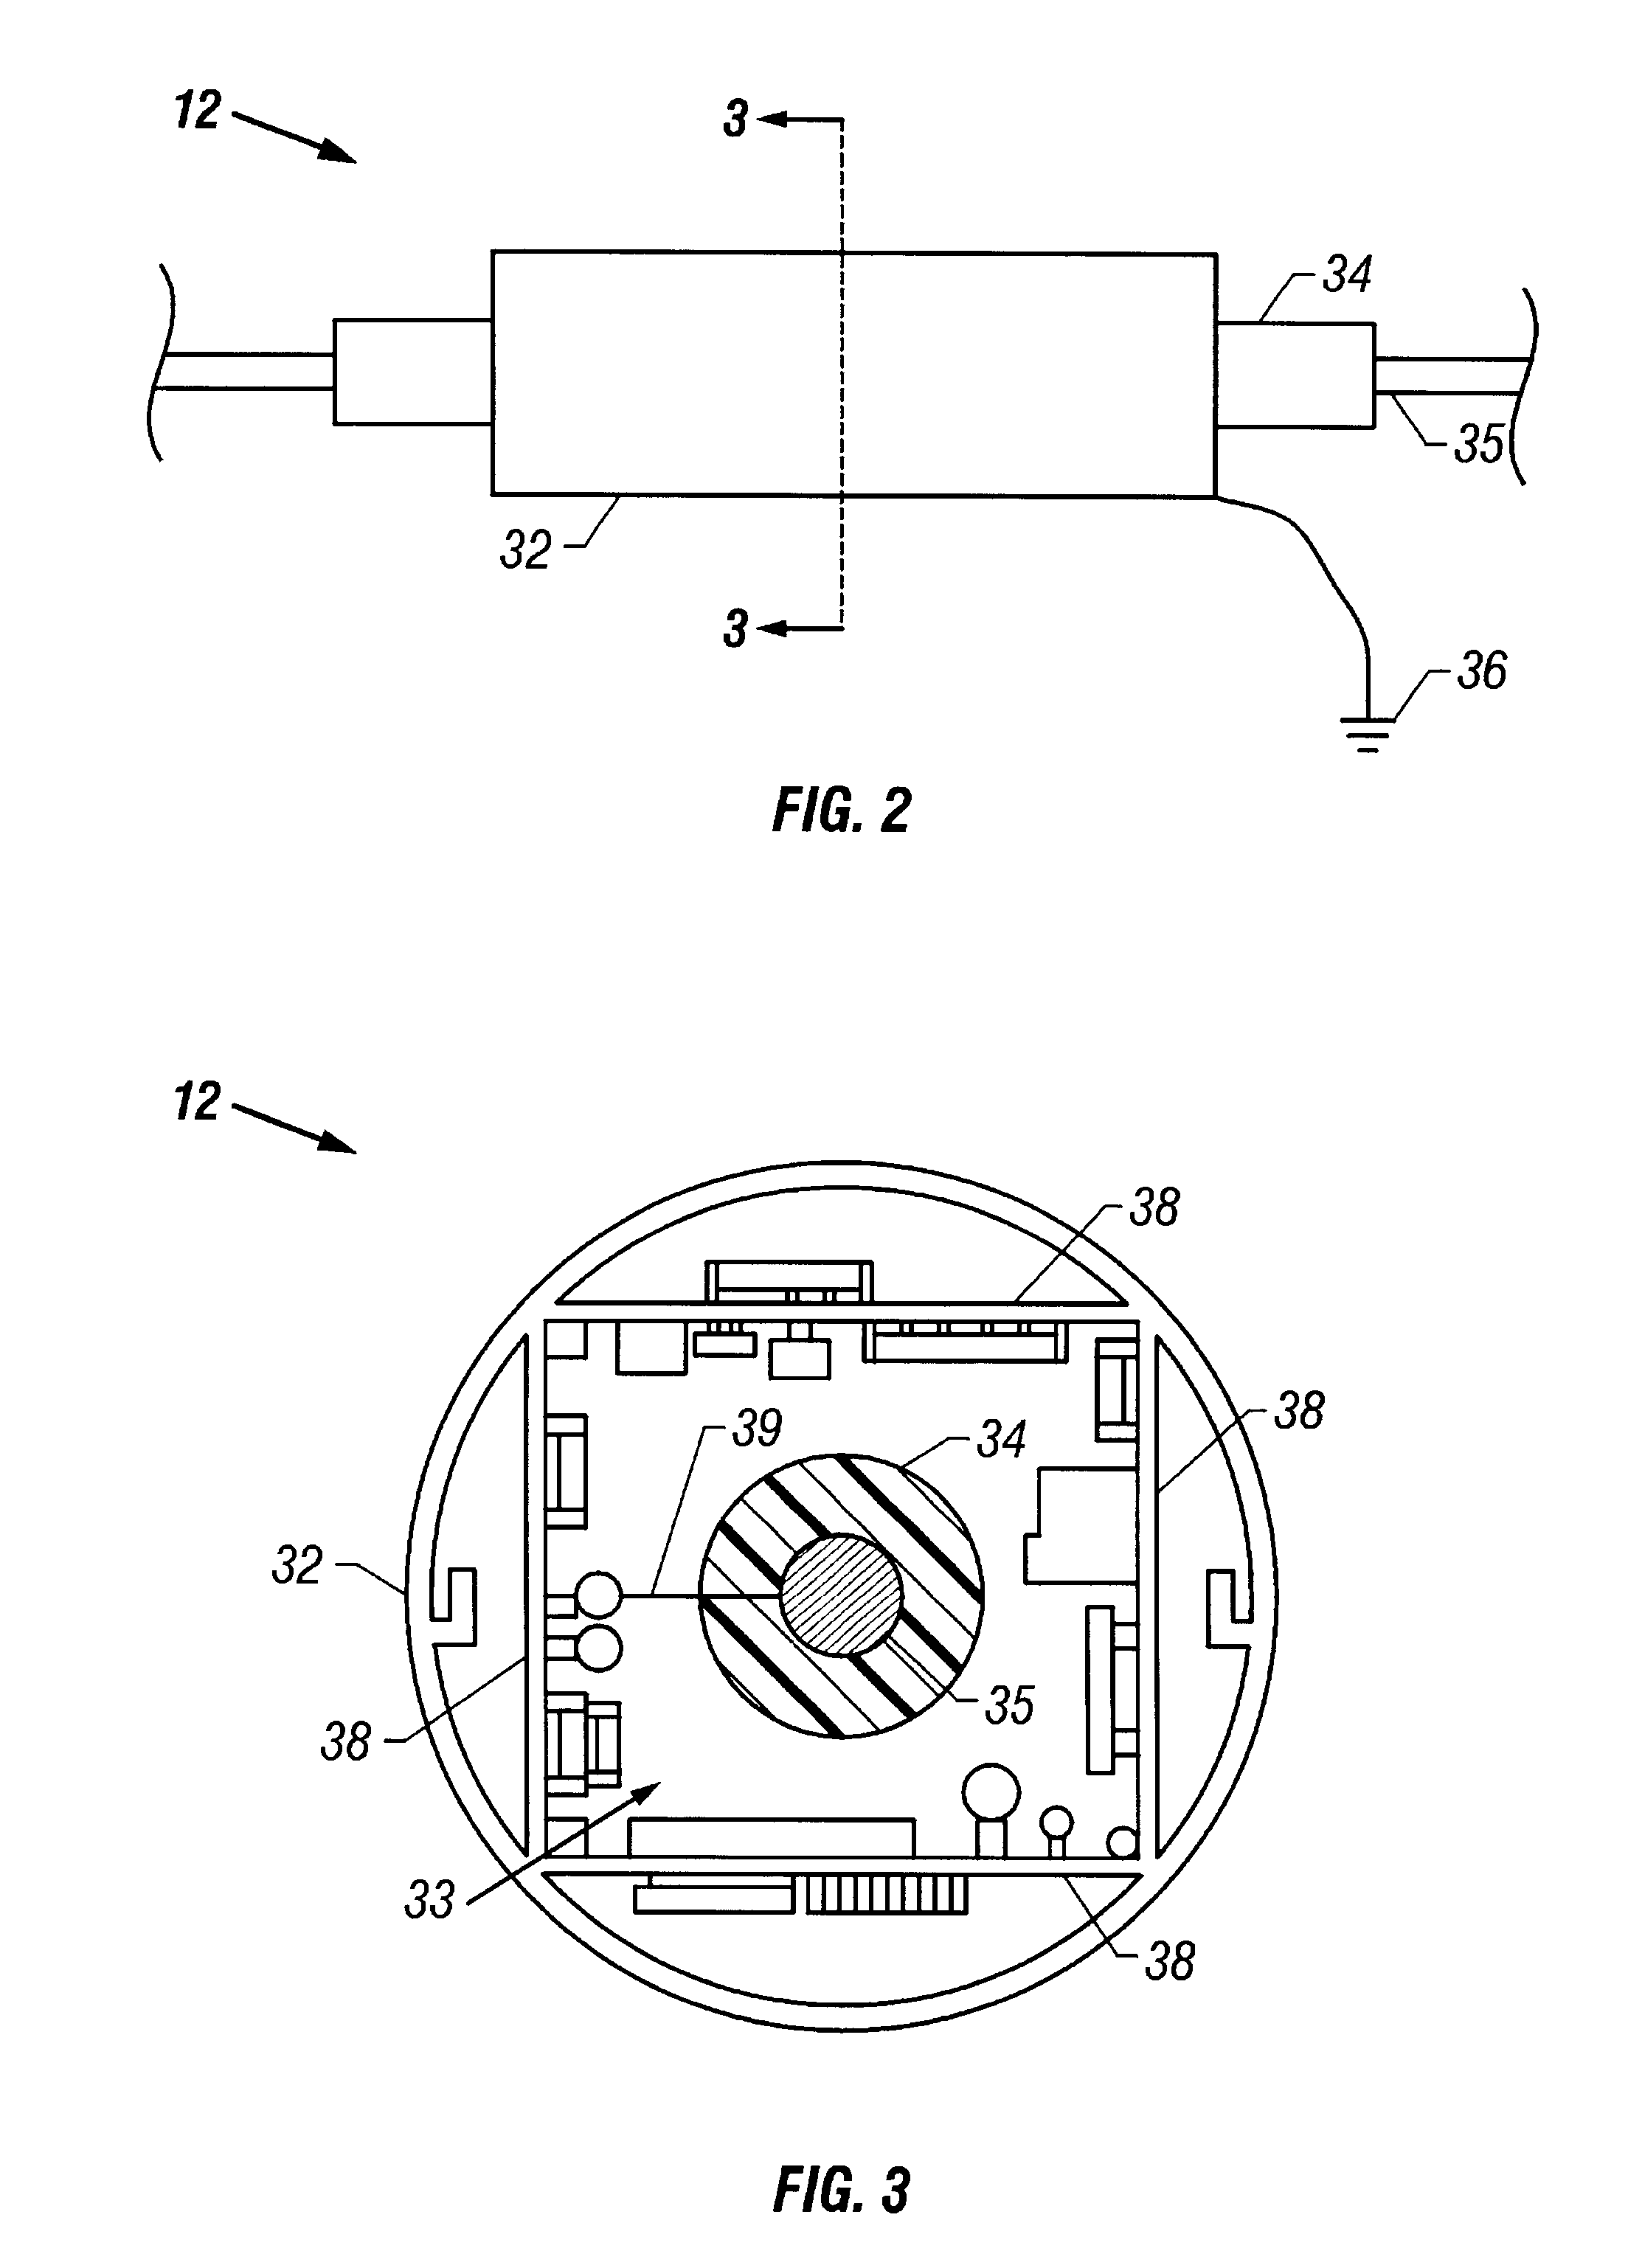 Apparatus and system for remotely updating and monitoring the status of a vehicle